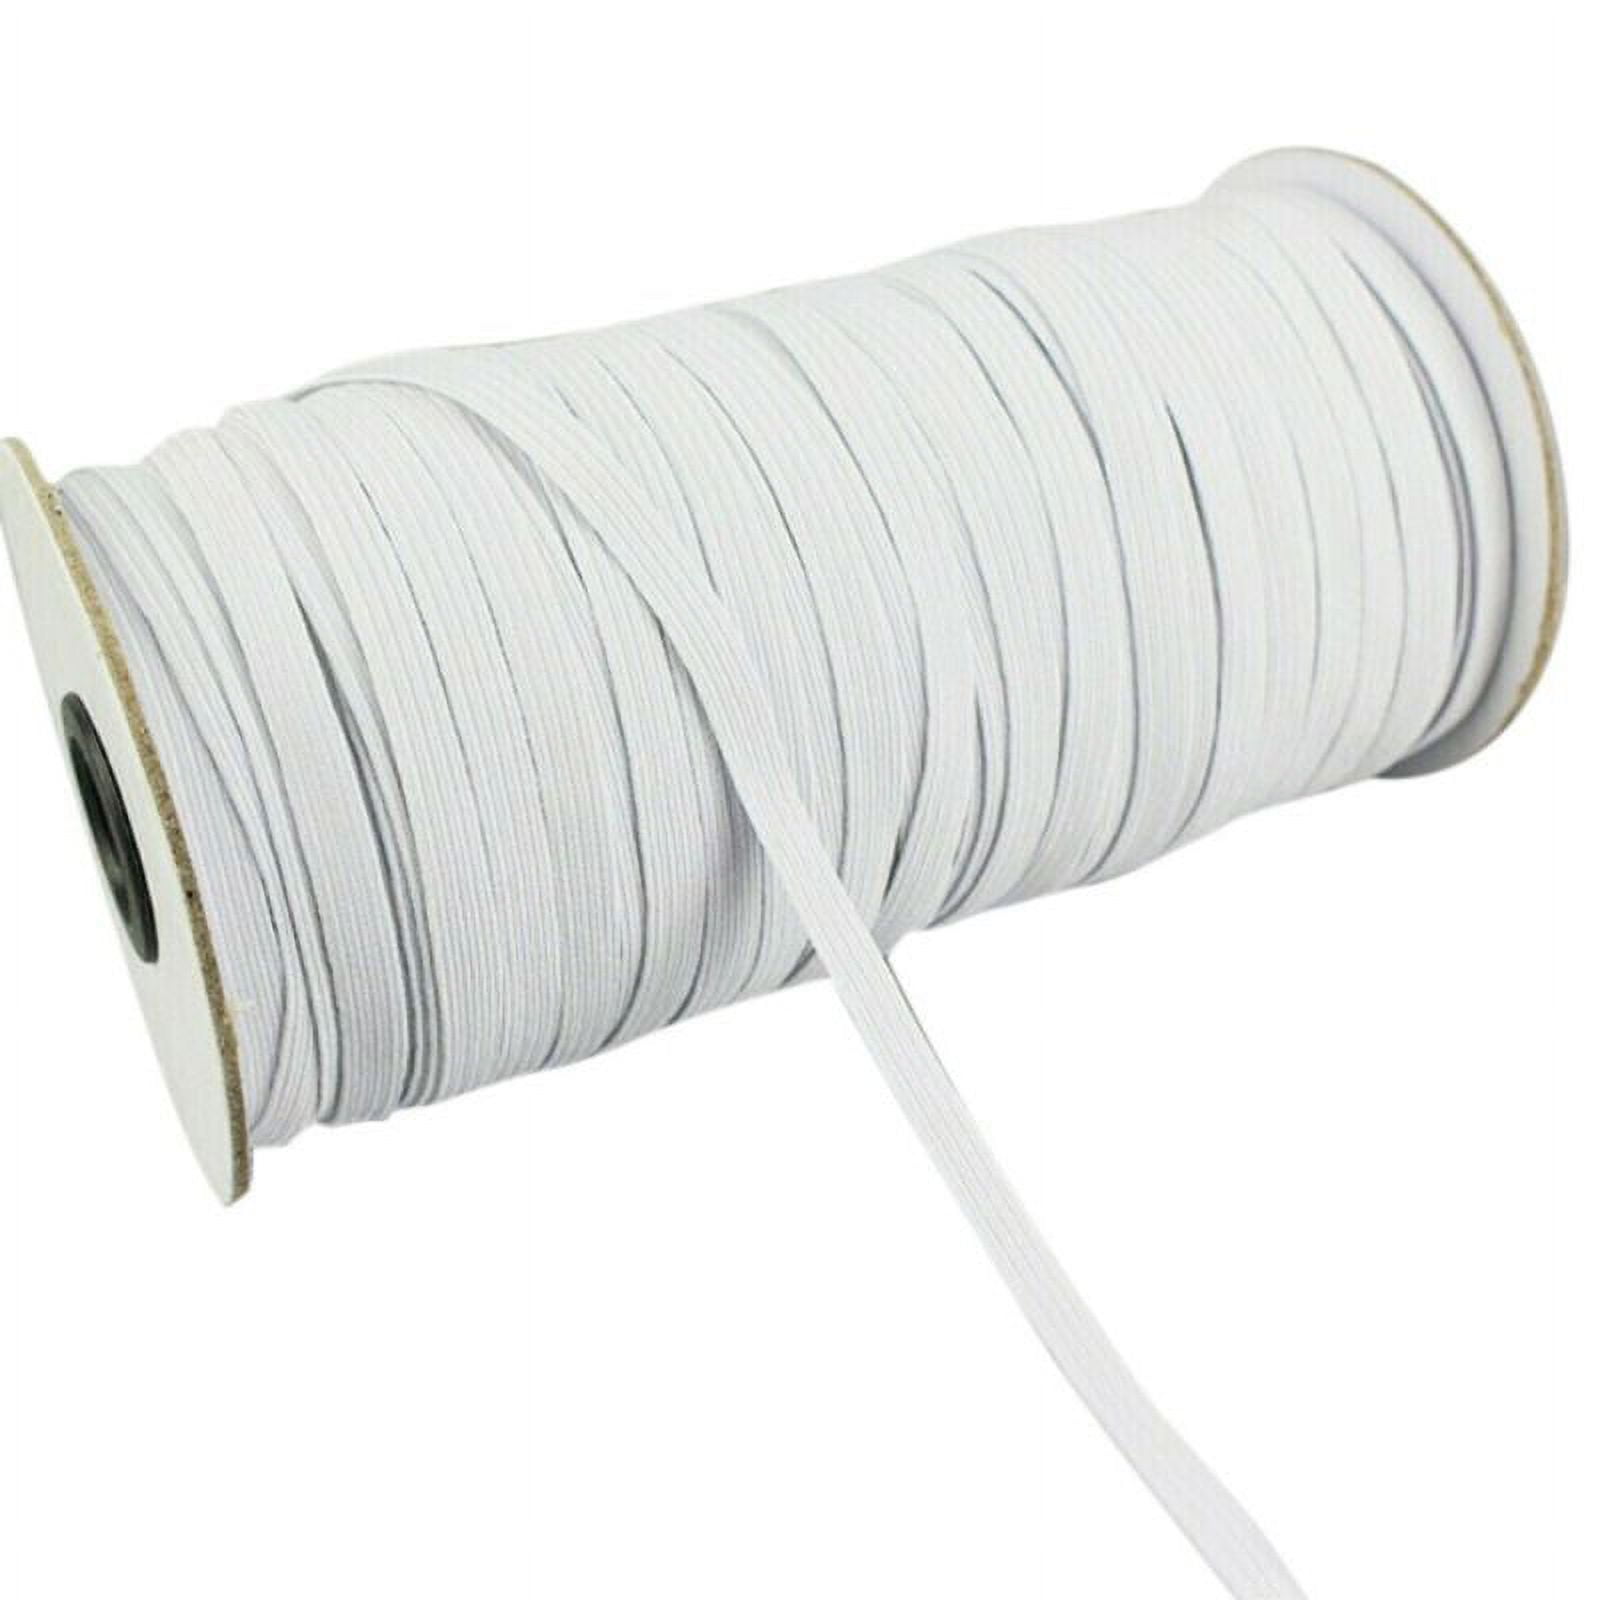 Artibetter 1 Roll 50M Elastic Band Handmade Elastic Thread DIY Manual  Wiring Strong Rope for Bracelet Jewelry Clothes (White)